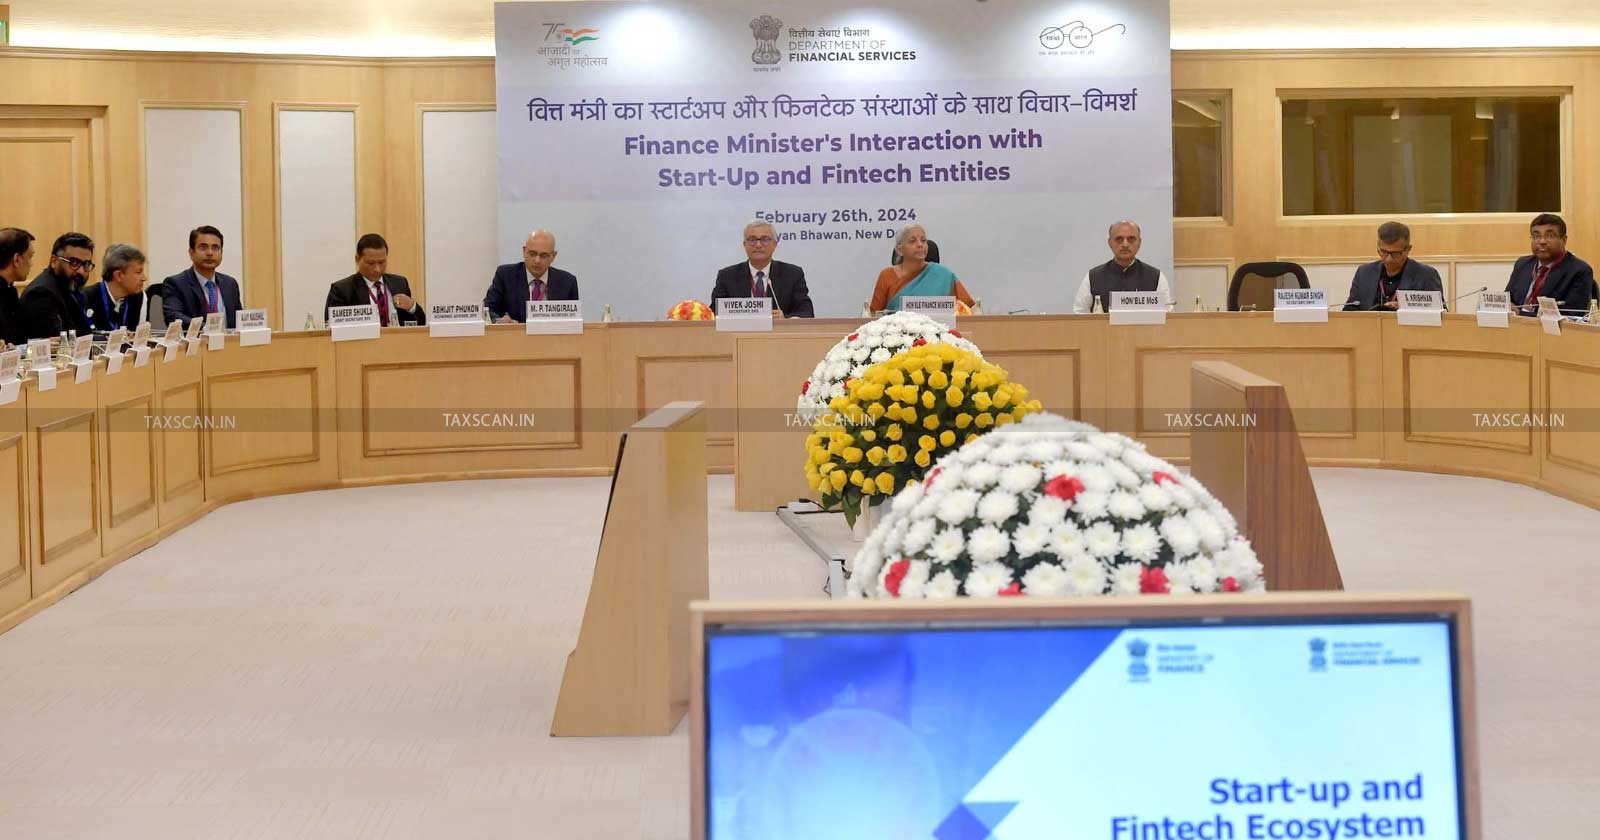 FM Urges Regulators - RBI - Hold Monthly Virtual Meetings - Startup - Fintech Concerns - taxscan